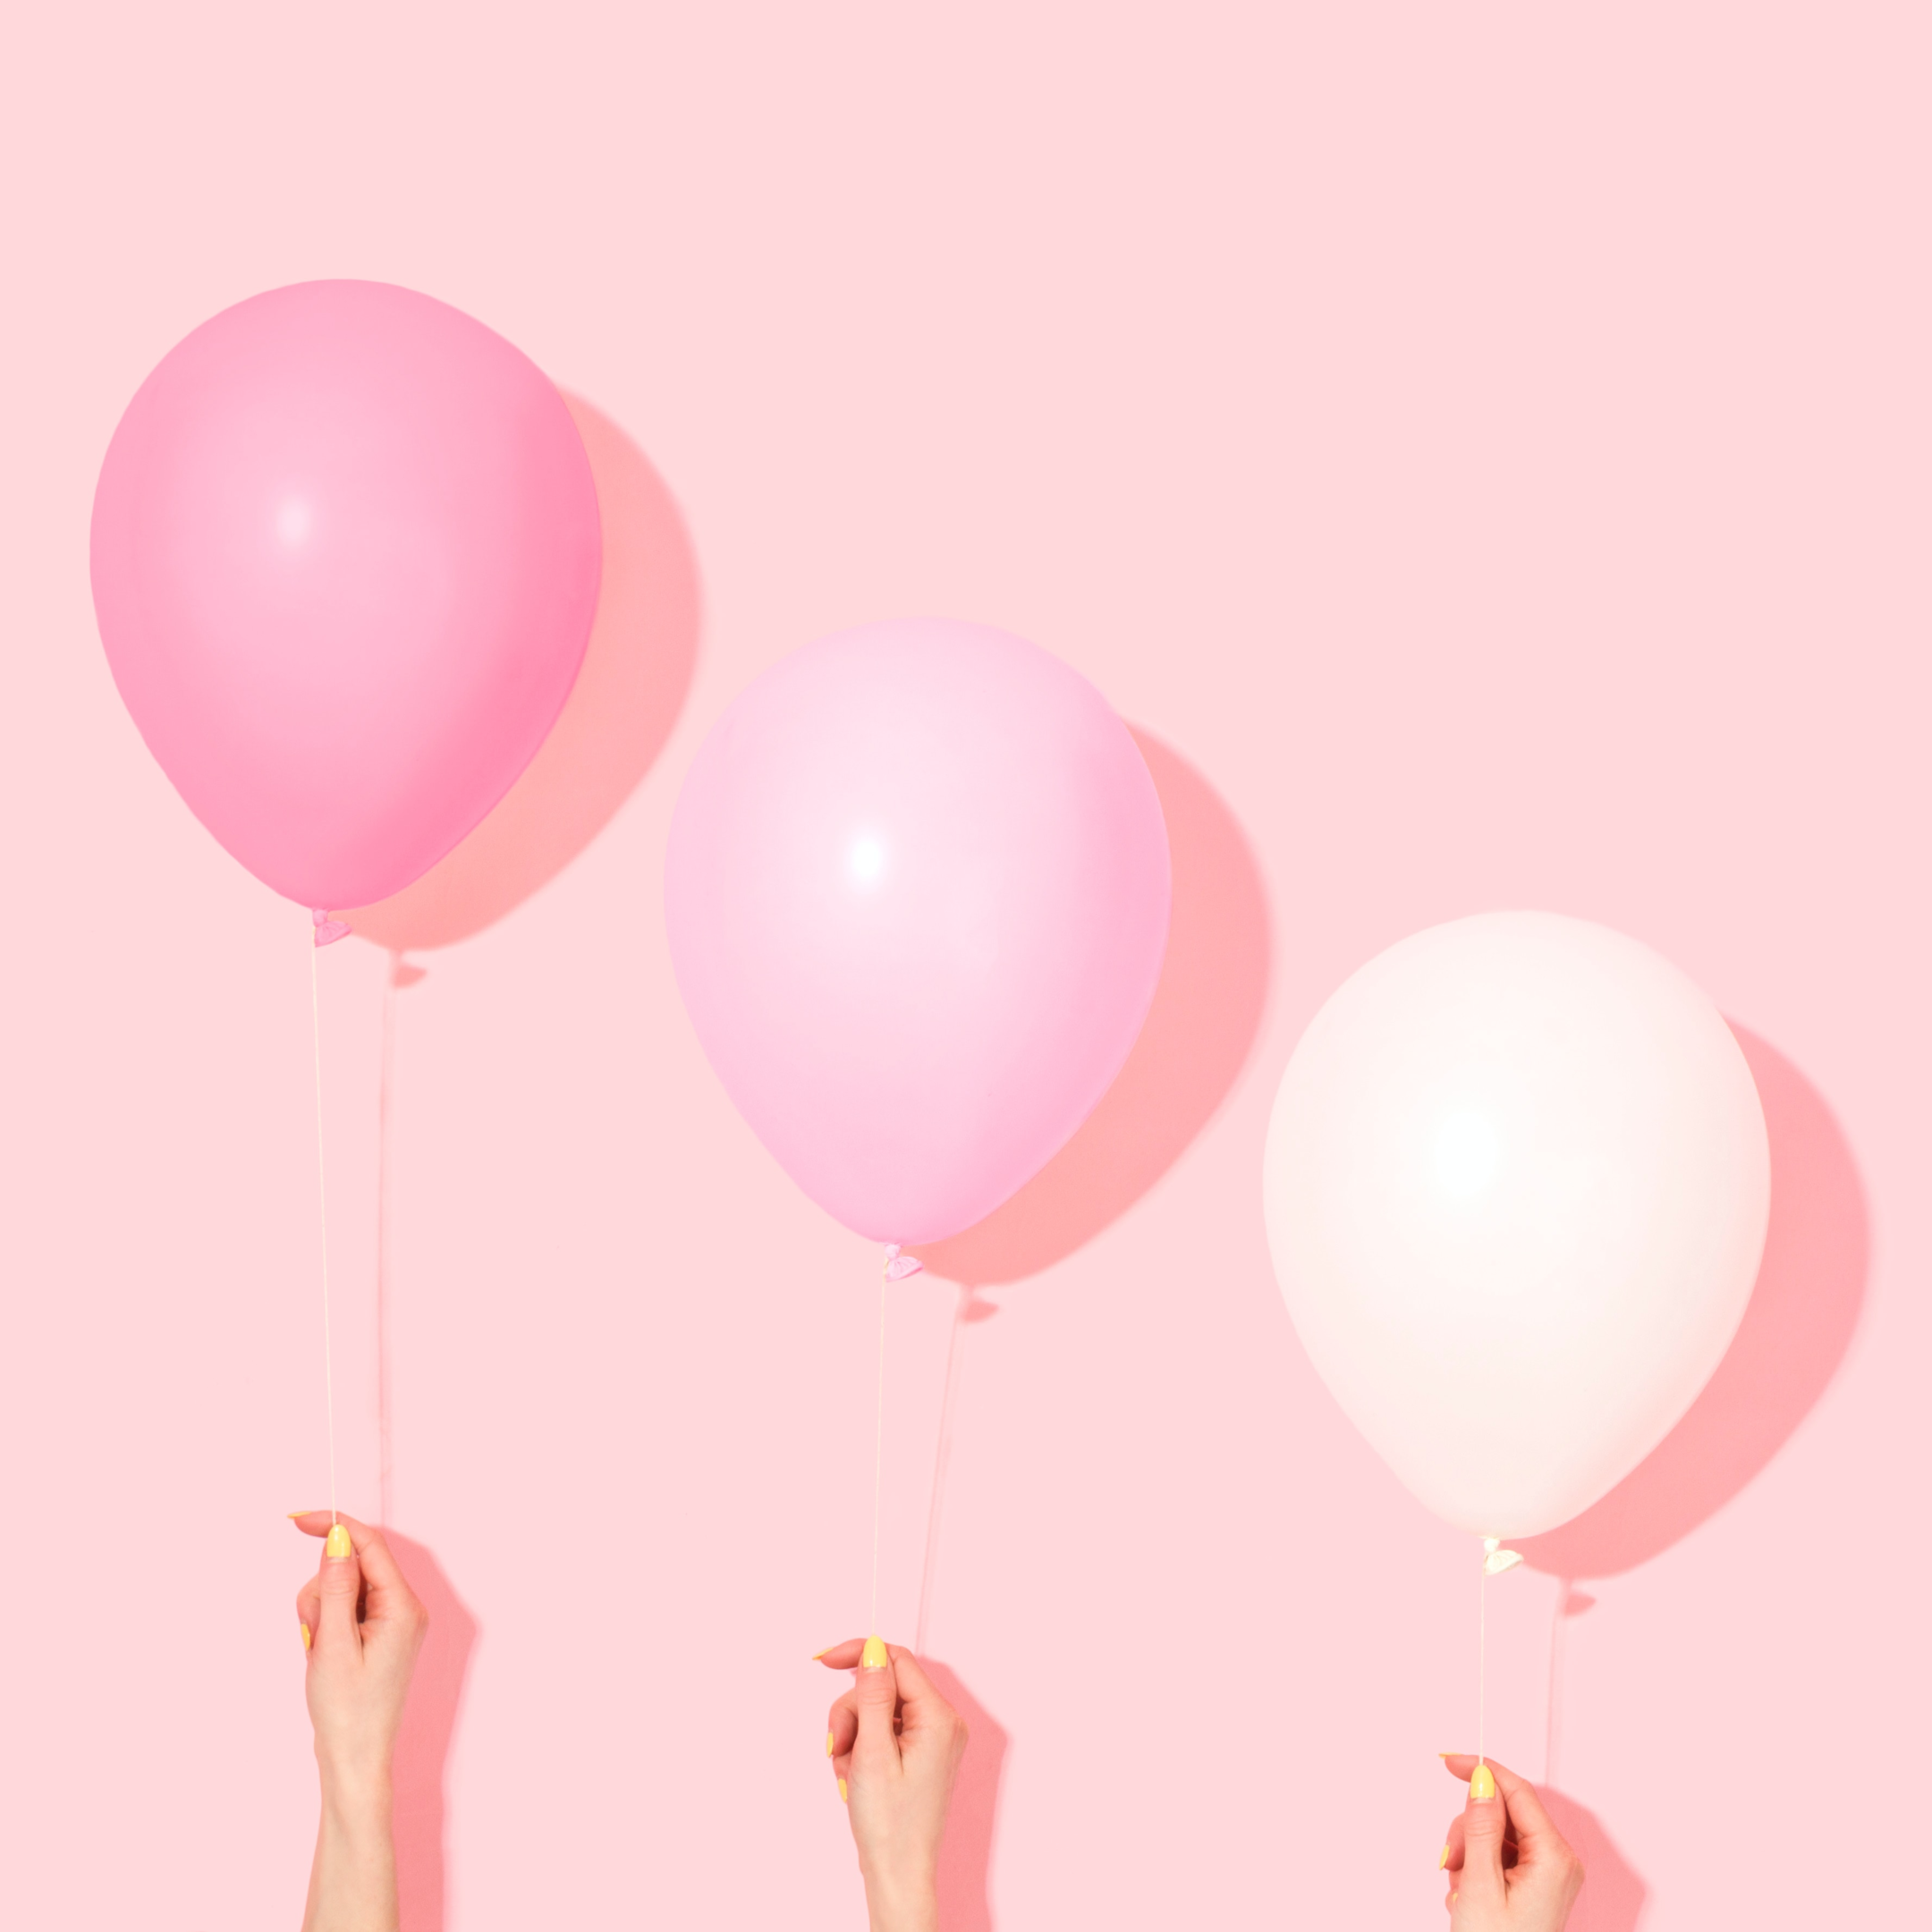 Three pink balloons of different gradients are held up against a pink background.